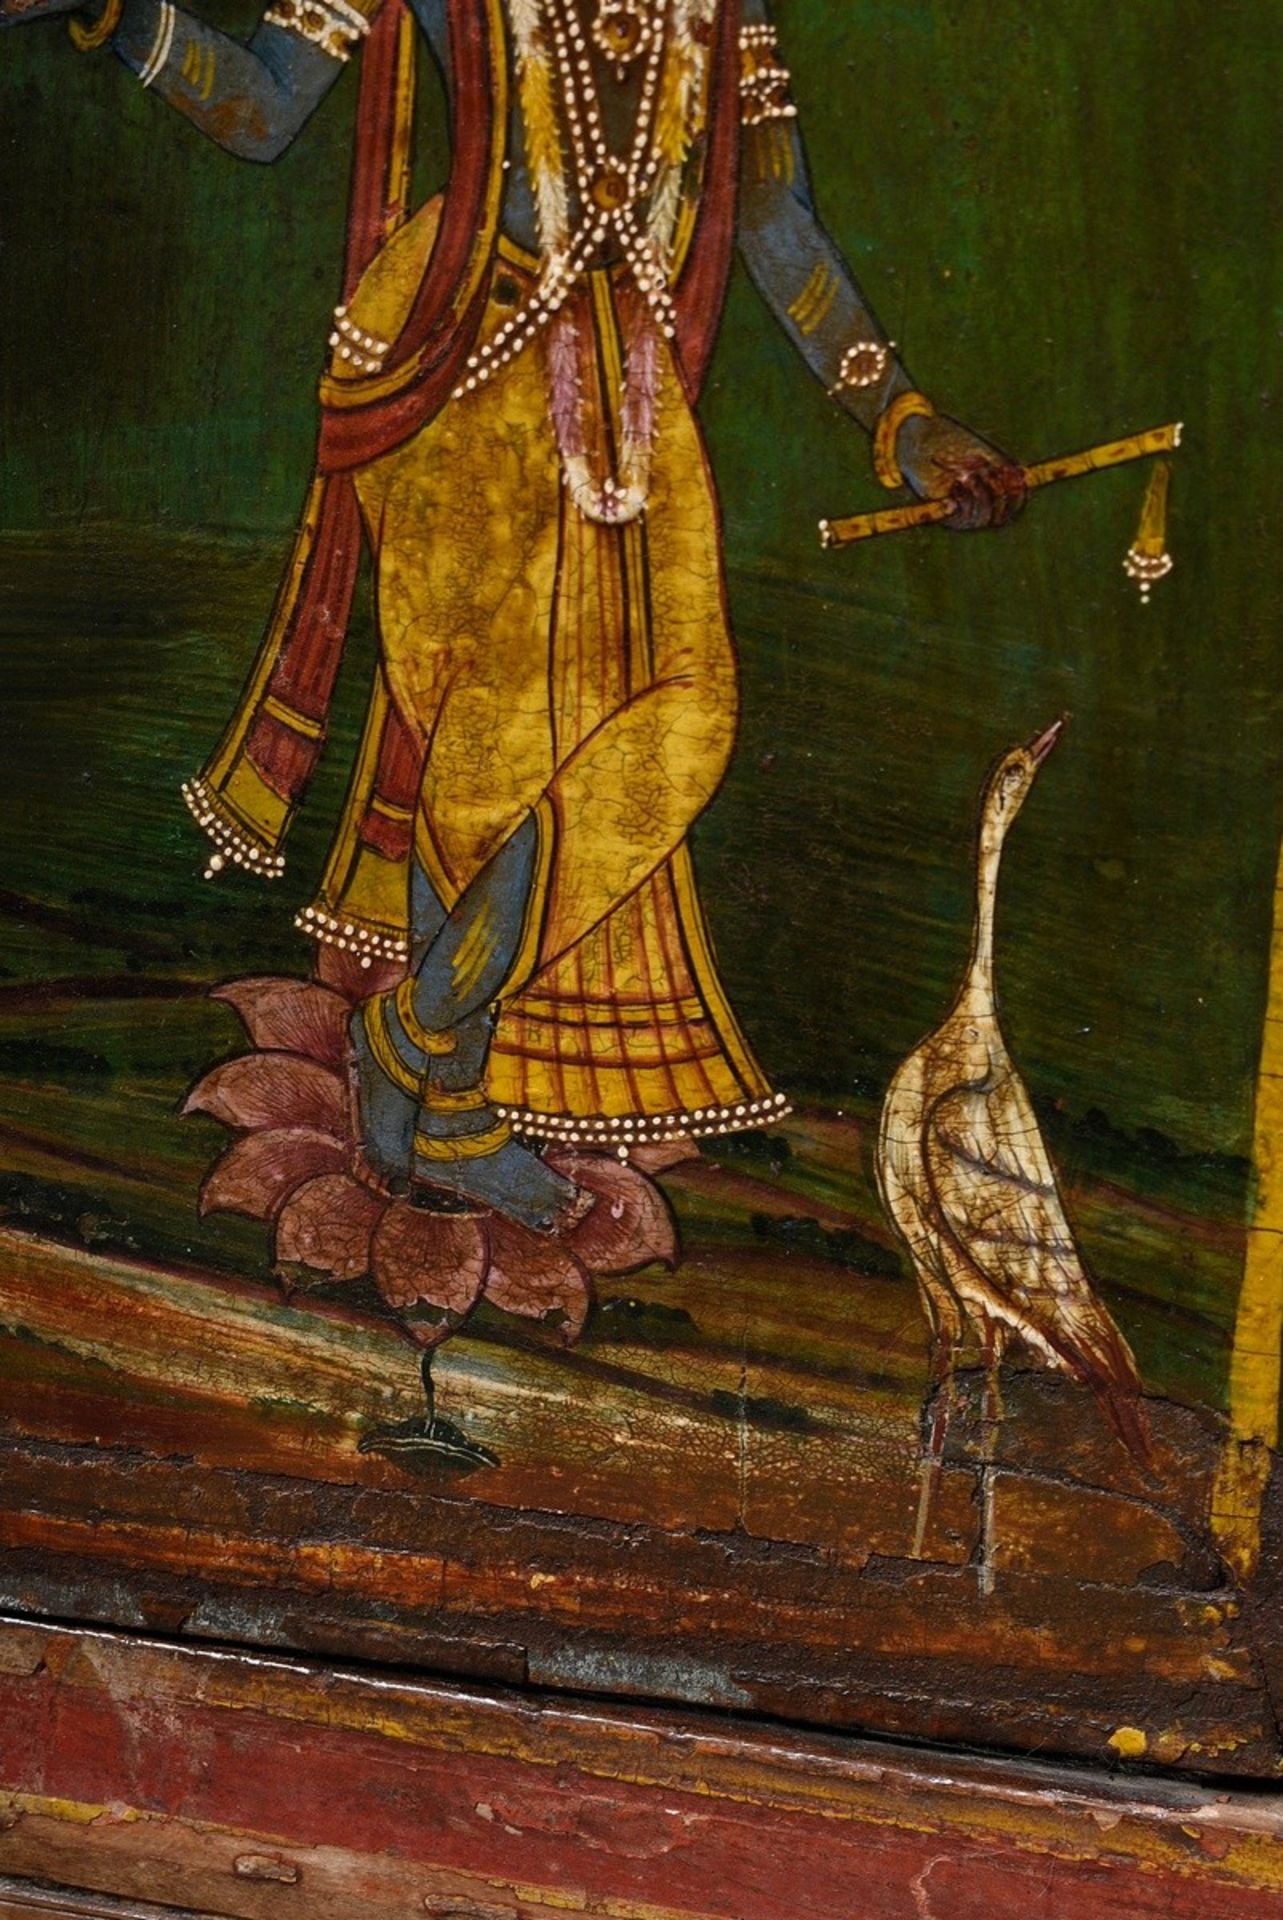 Indian furniture door with polychrome painting "Krishna and Parvati", around 1890/1900, 52,5x49,5cm - Image 3 of 7